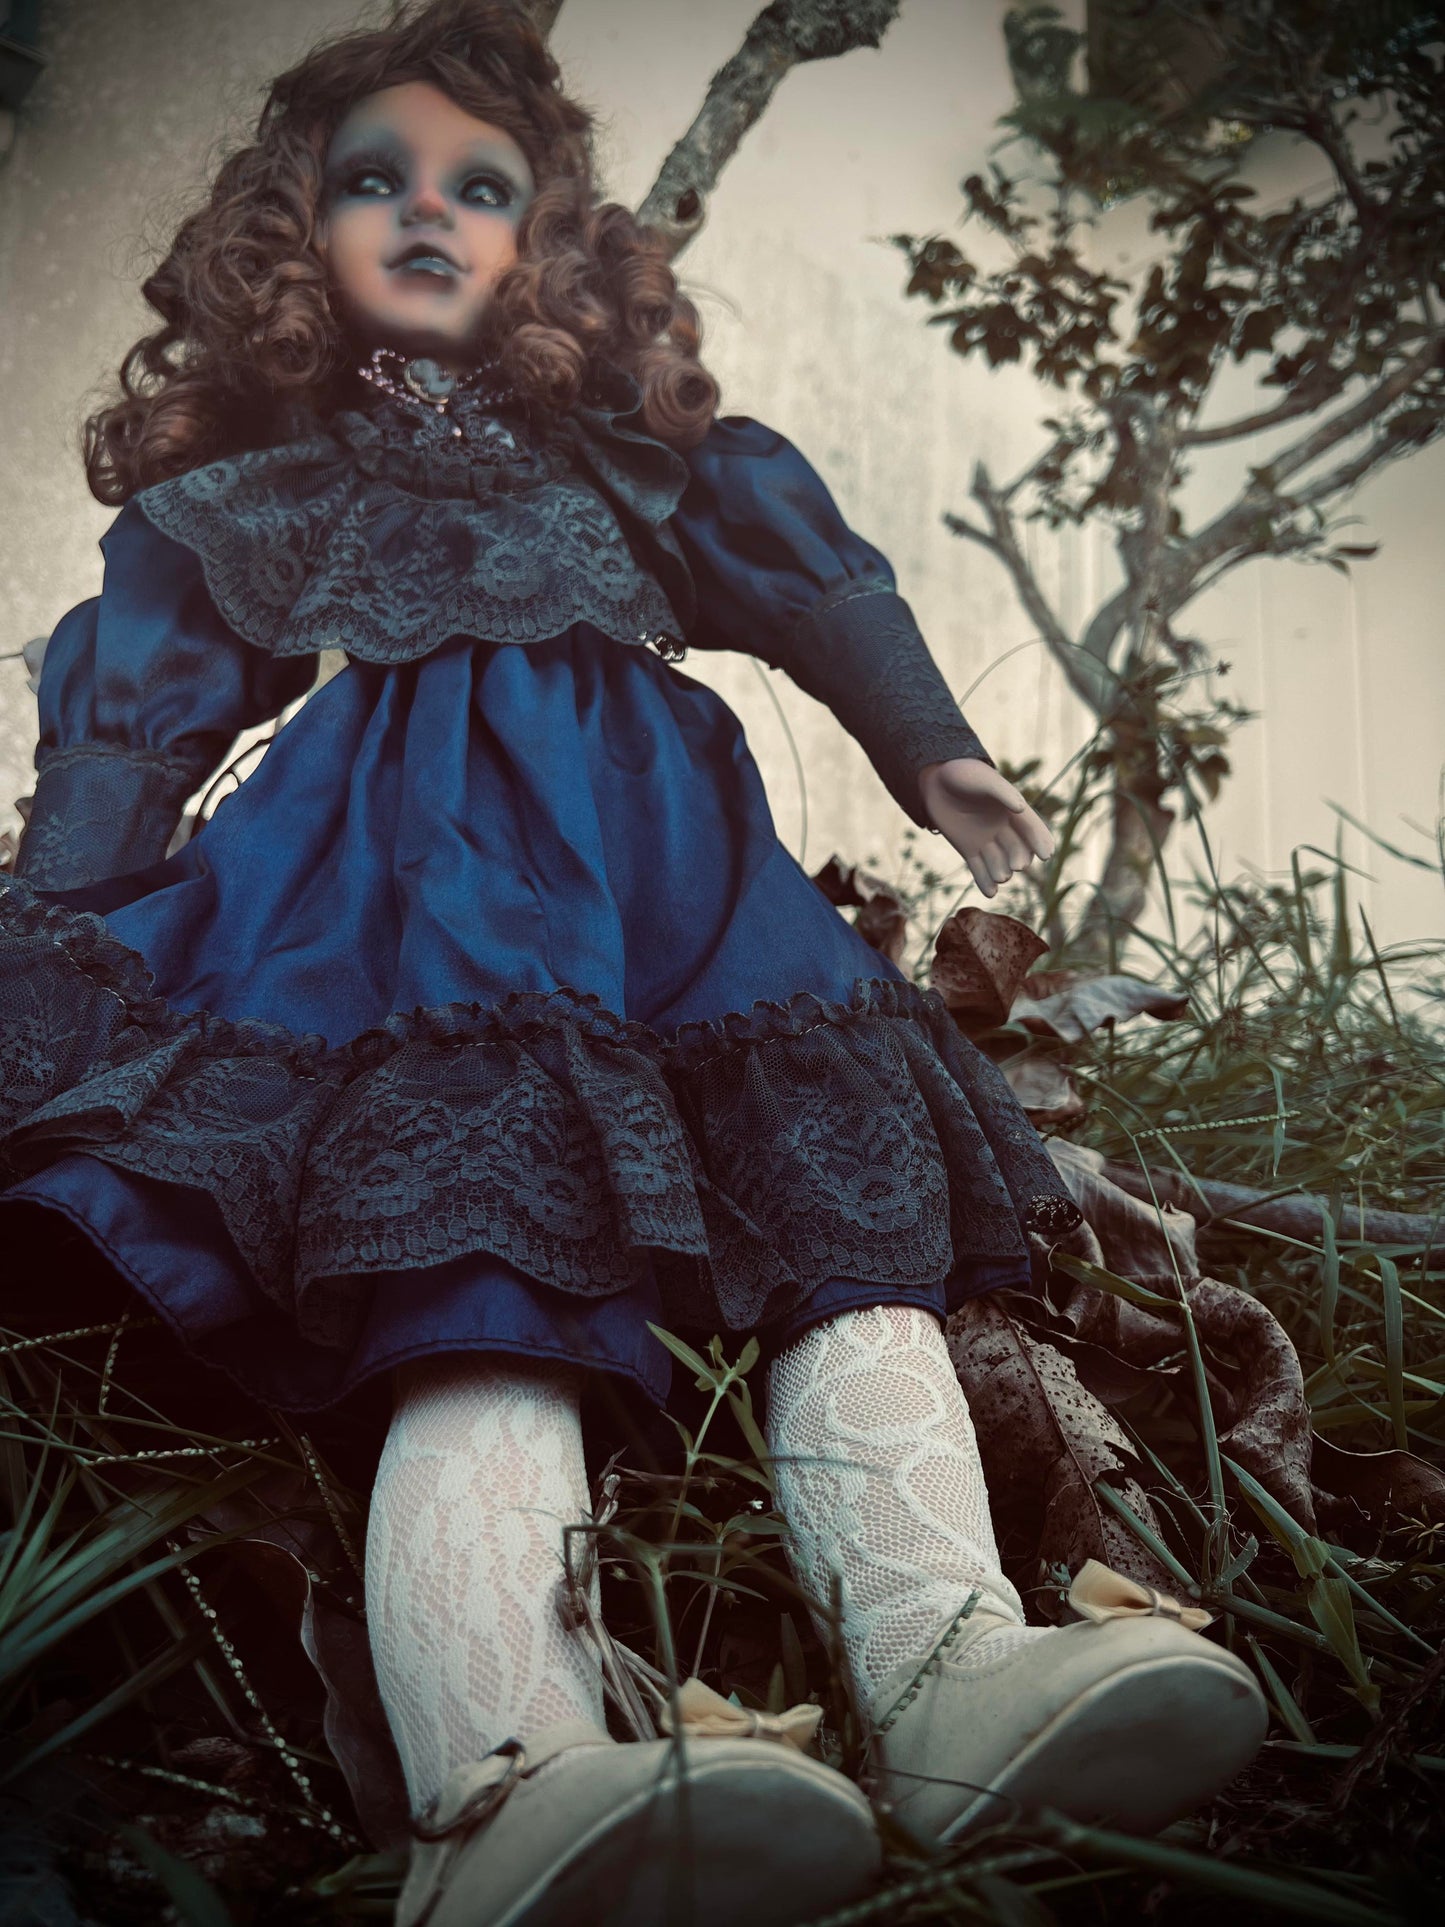 Meet Leola 25" Doll Porcelain Witchy Creepy Haunted Spirit Infected Scary Poltergeist Spooky Zombie Possessed Fall Gothic Positive Energy